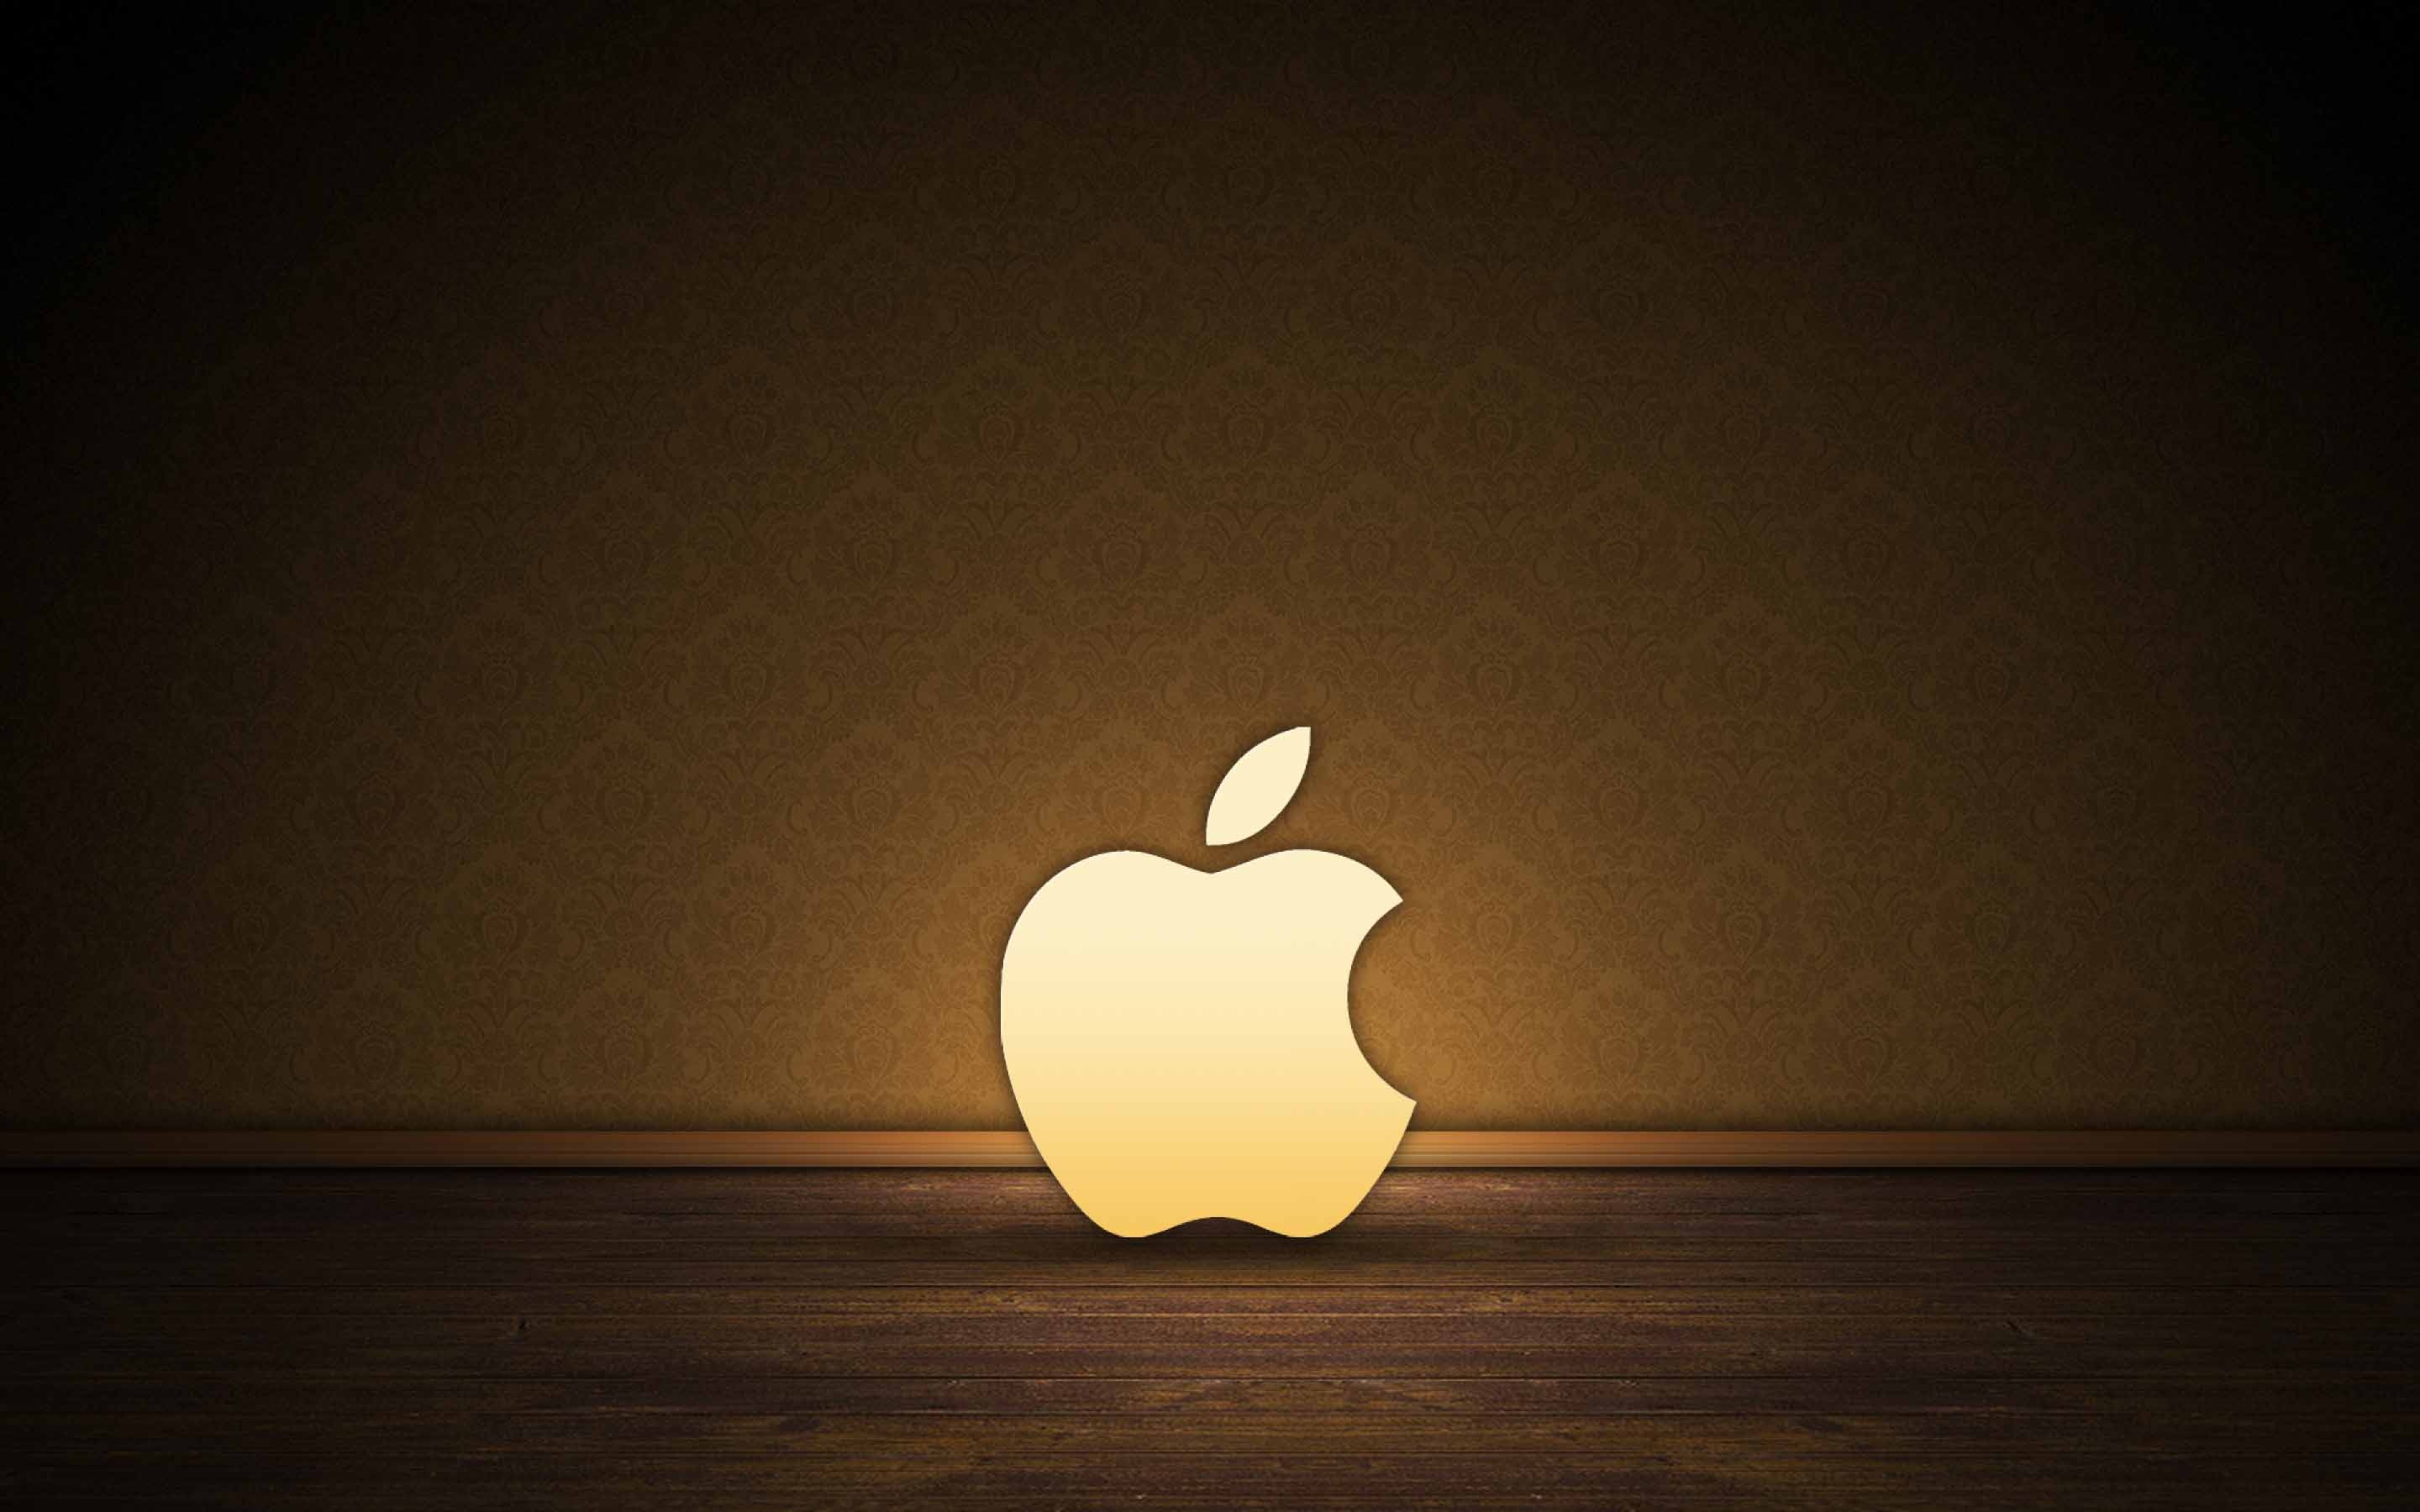 Brown color apple logo free high definition wallpaper. High